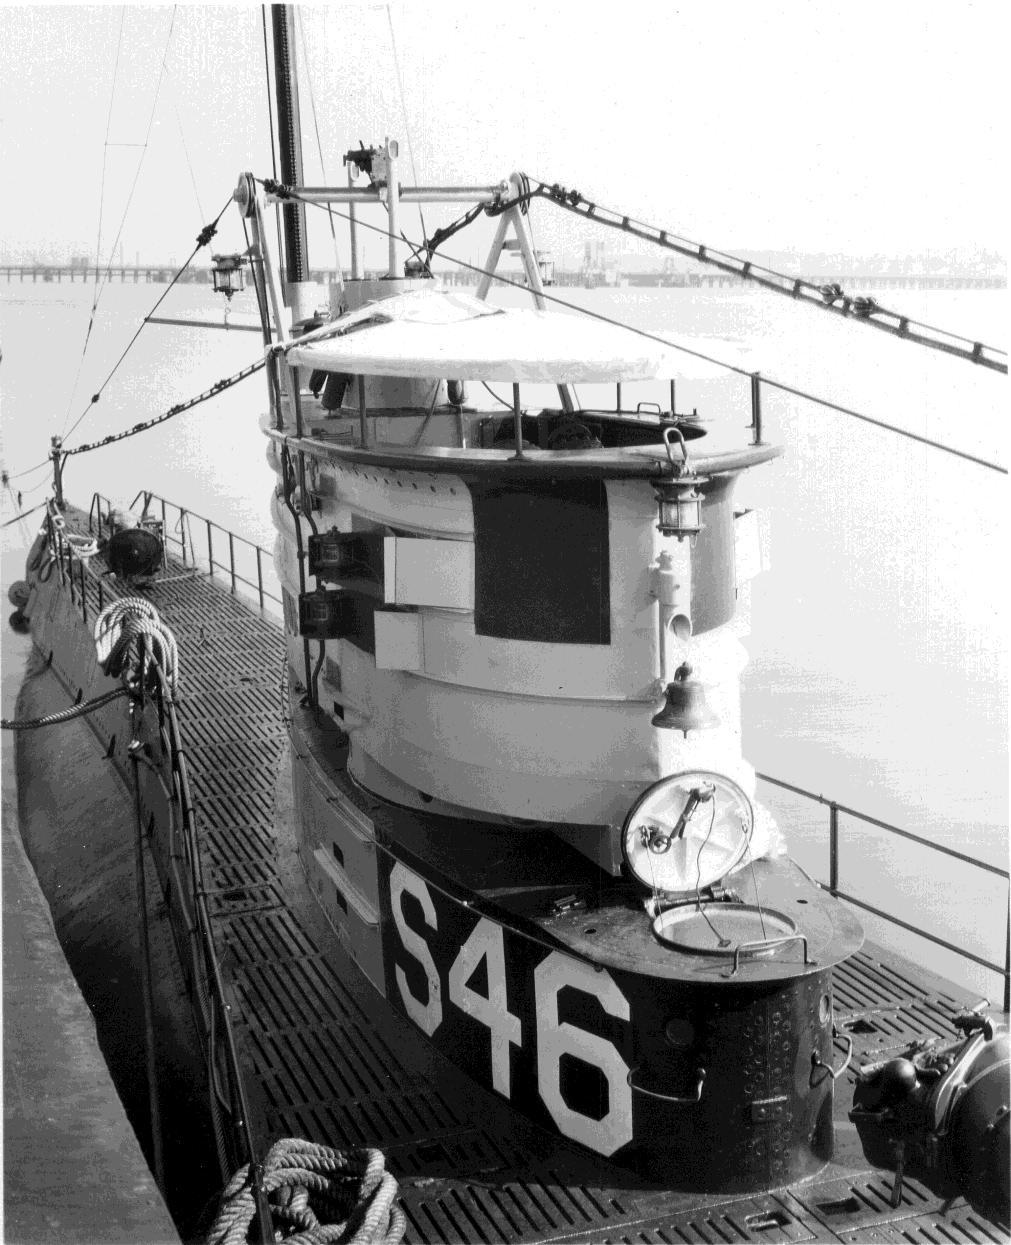 Lengthened by six feet and weighing in approximately 33 tons heavier, these boats had a rearranged ballast and fuel tank arrangement, and had modifications to their duct keel and Kingston valve